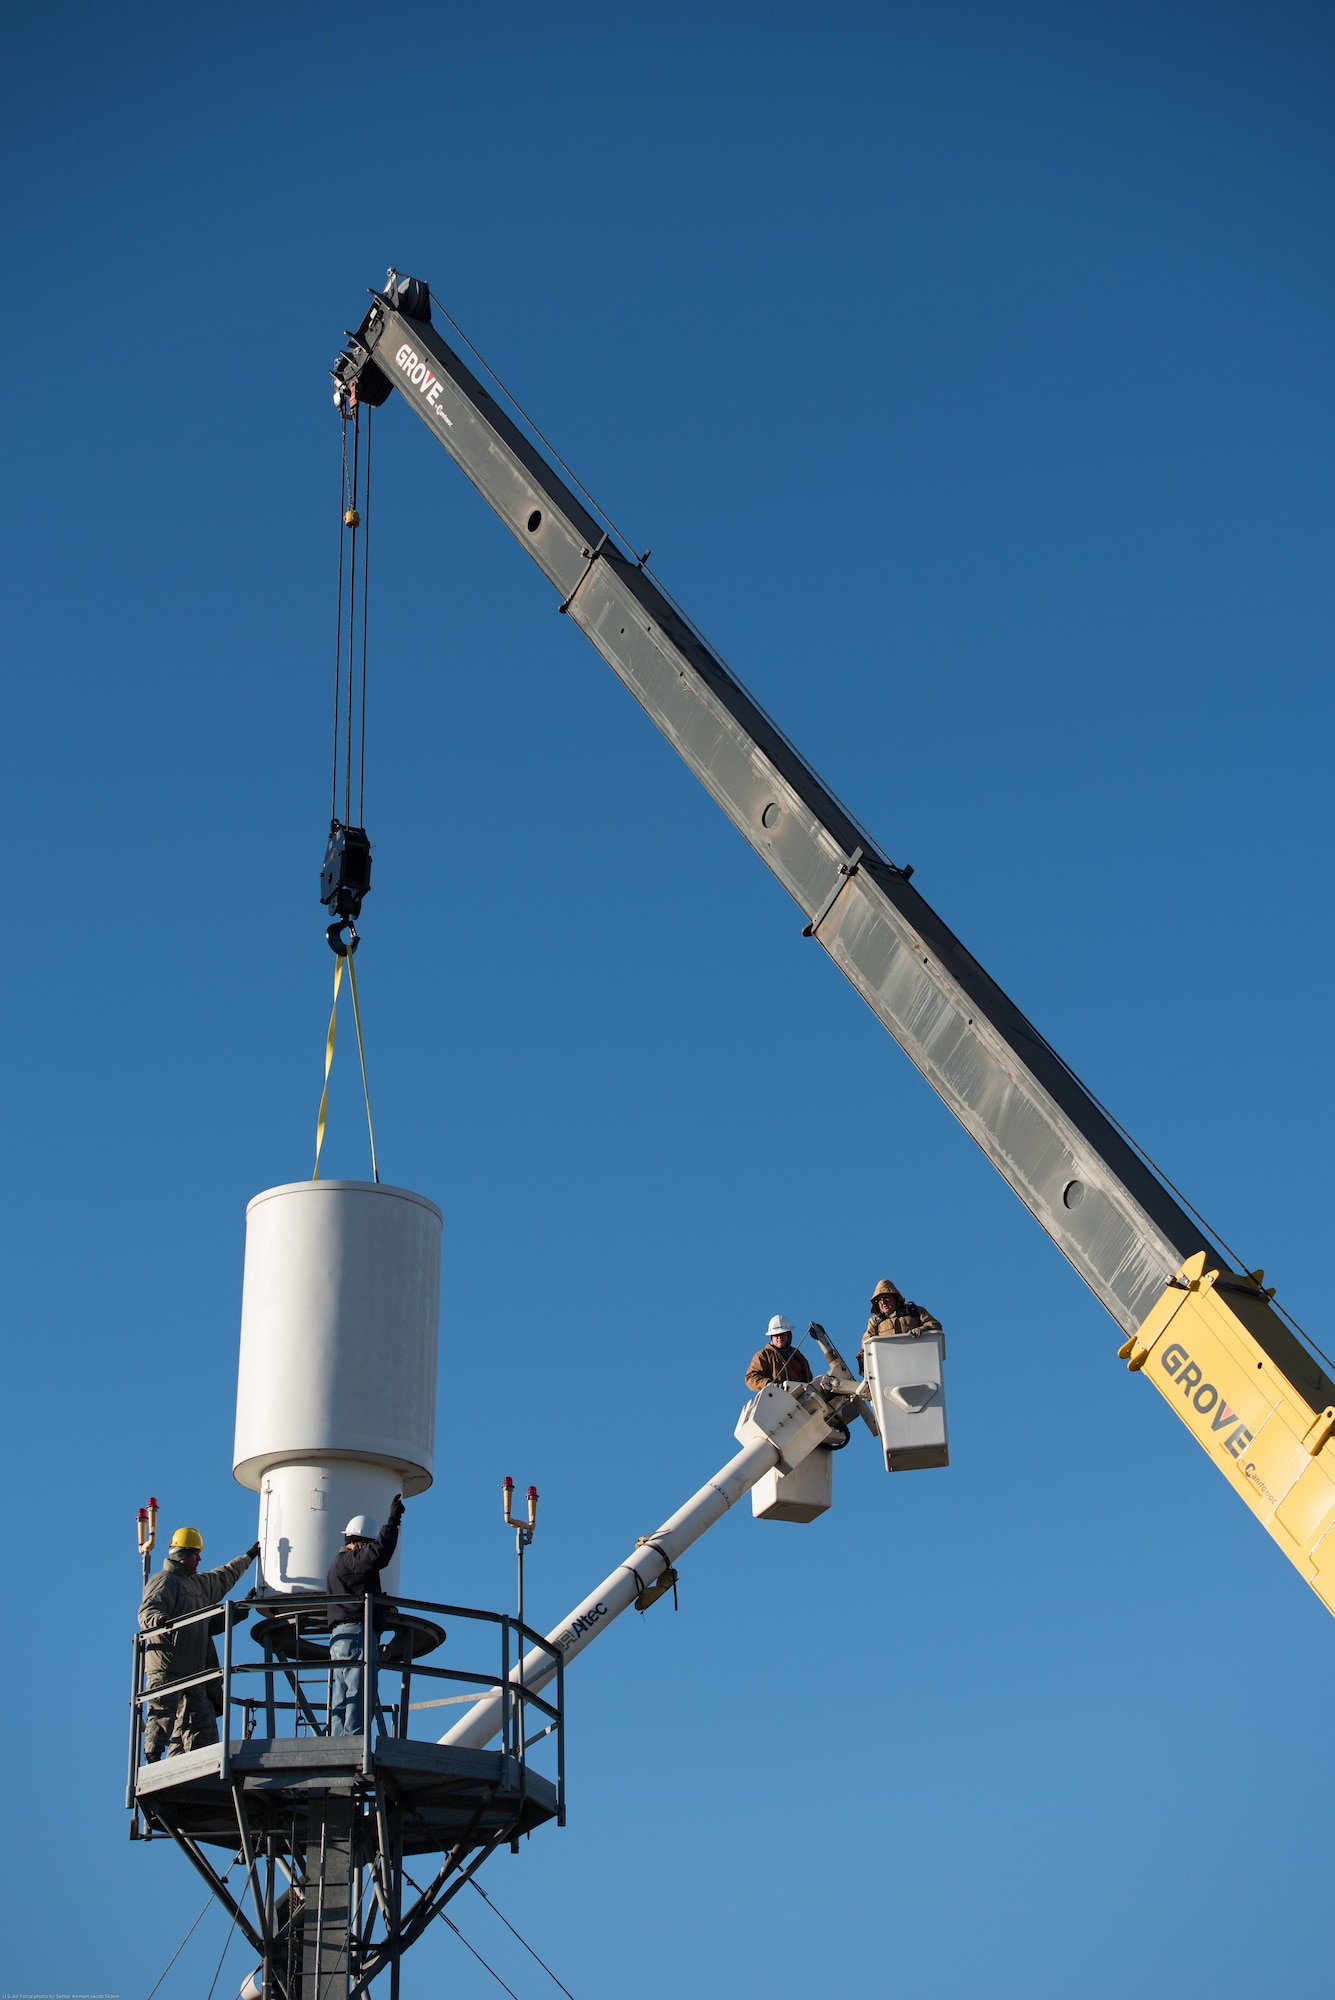 Airmen and contractors guide Offutt Air Force Base’s (AFB) legacy Tactical Air Navigation System (TACAN) as a crane operator hoists the system off its tower at Offutt AFB, Nebraska, Nov. 29, 2017.